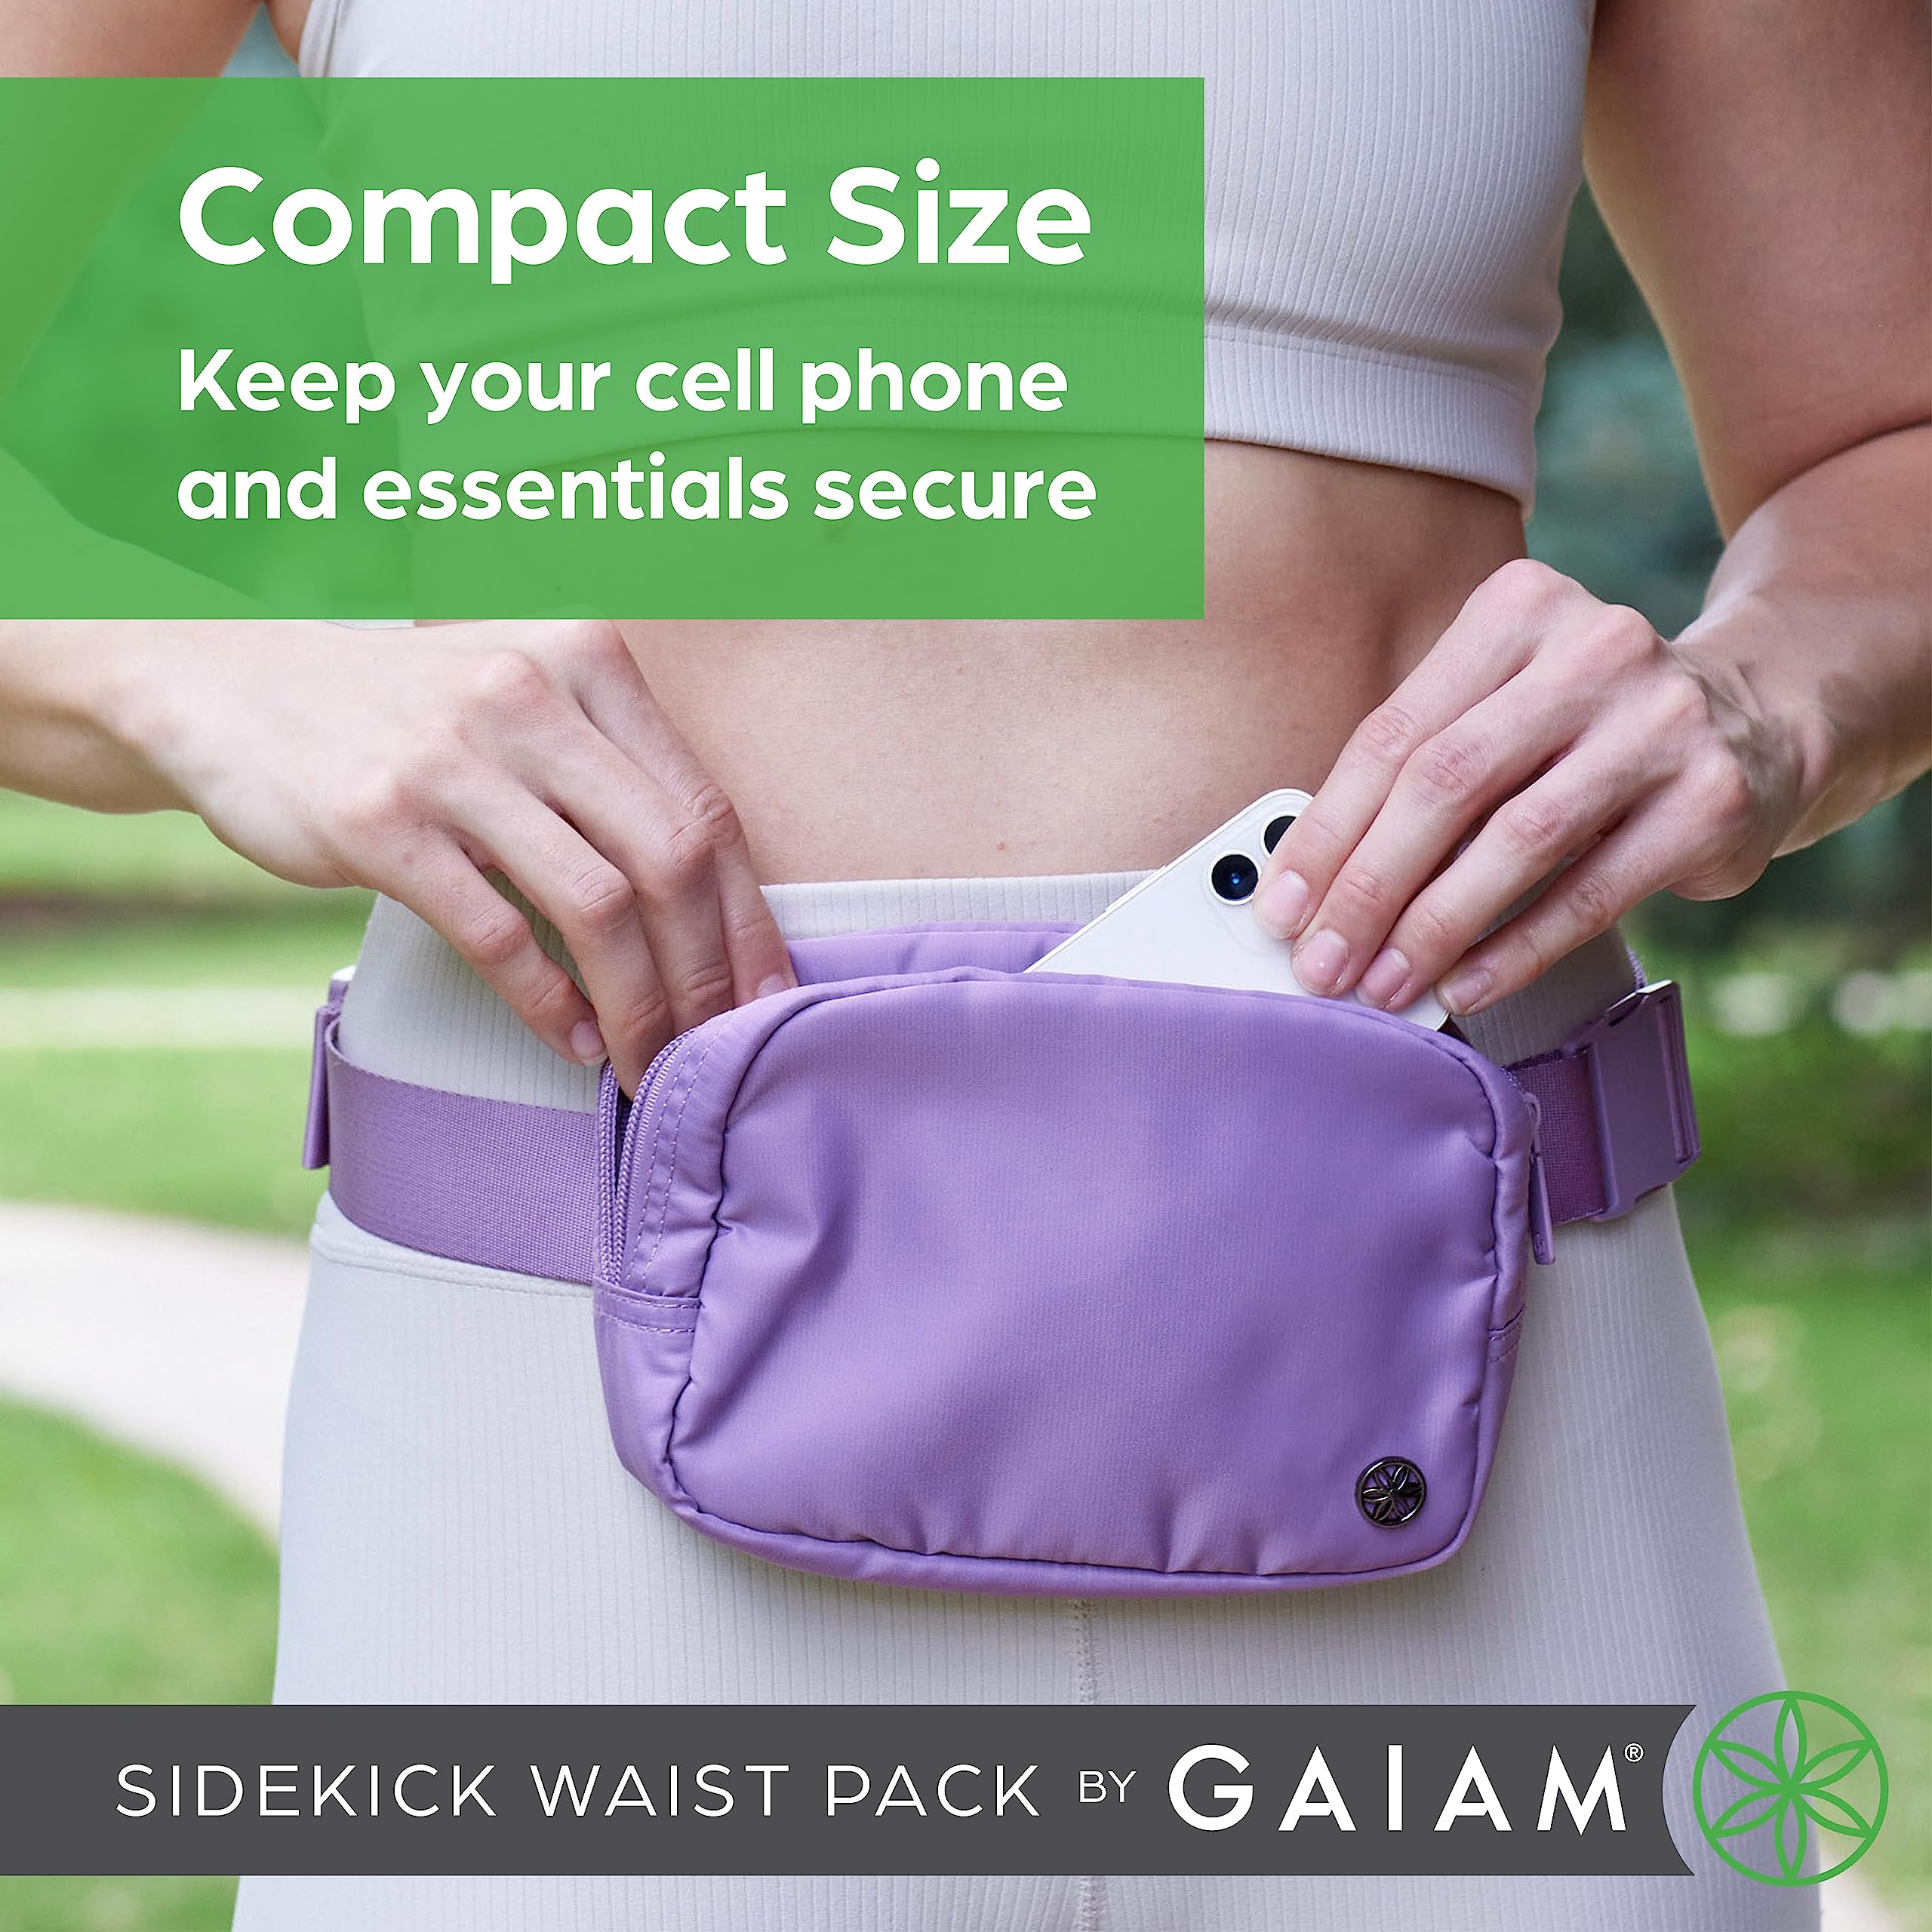 Buy Gaiam Sidekick Waist Pack - Storage Belt Bag for Women And Men -  Adjustable Belt With Lightweight Pouch For The Gym & Studio